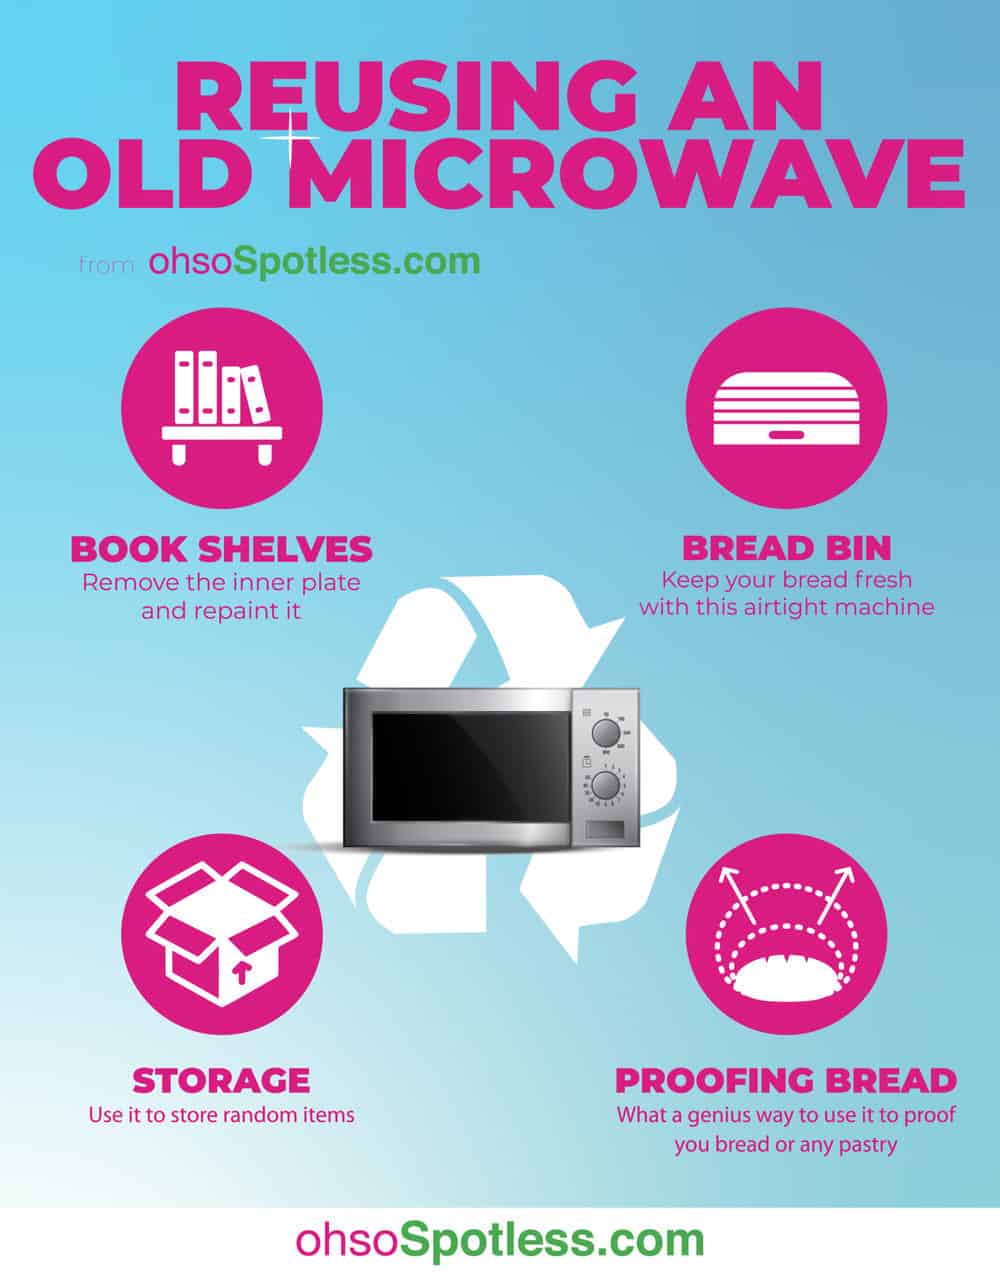 How to Reuse an Old Microwave